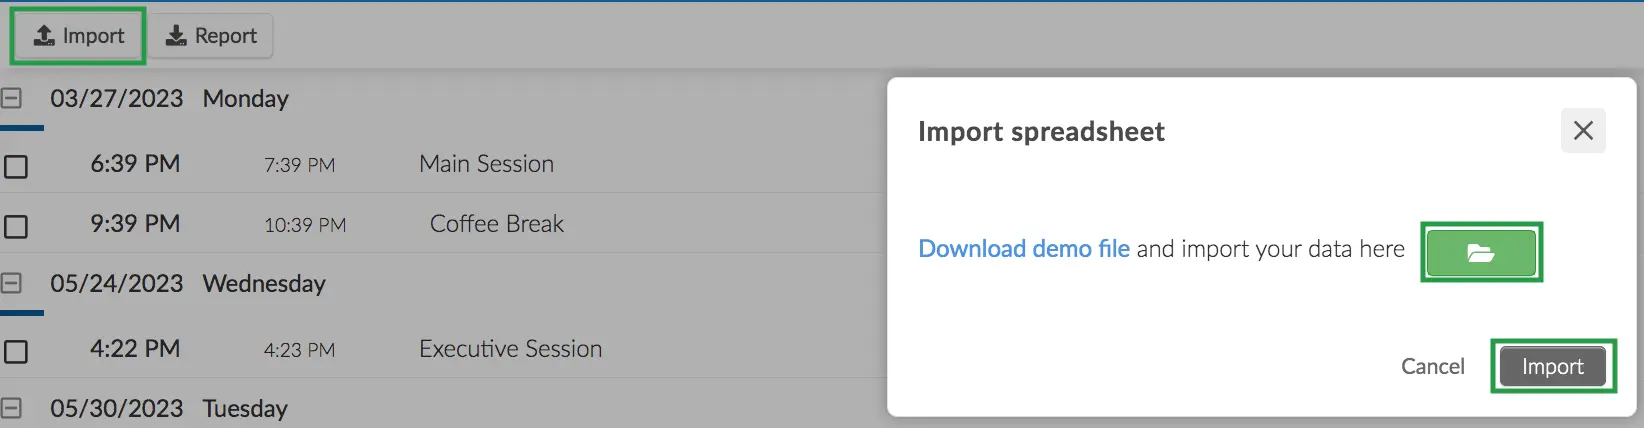 Image showing how to Import a spreadsheet by clicking on Import on top and then by clicking on the green folder and then import button in the window.